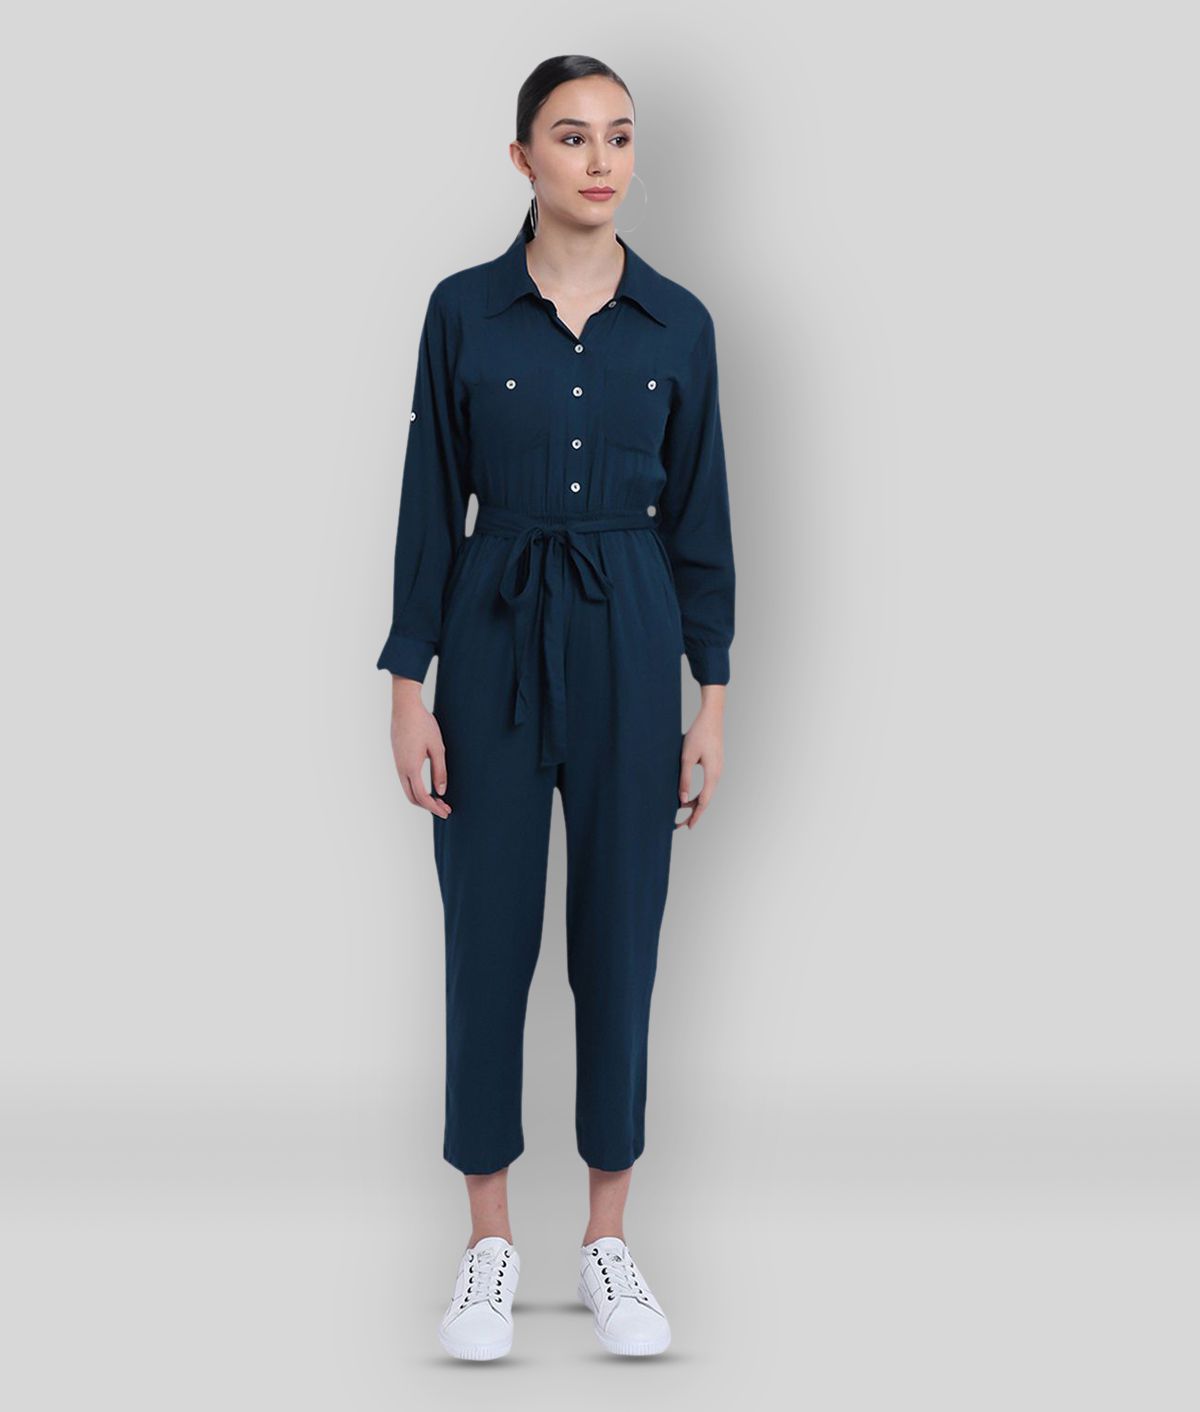 The Dry State - Navy Blue Rayon Regular Fit Women's Jumpsuit ( Pack of 1 )